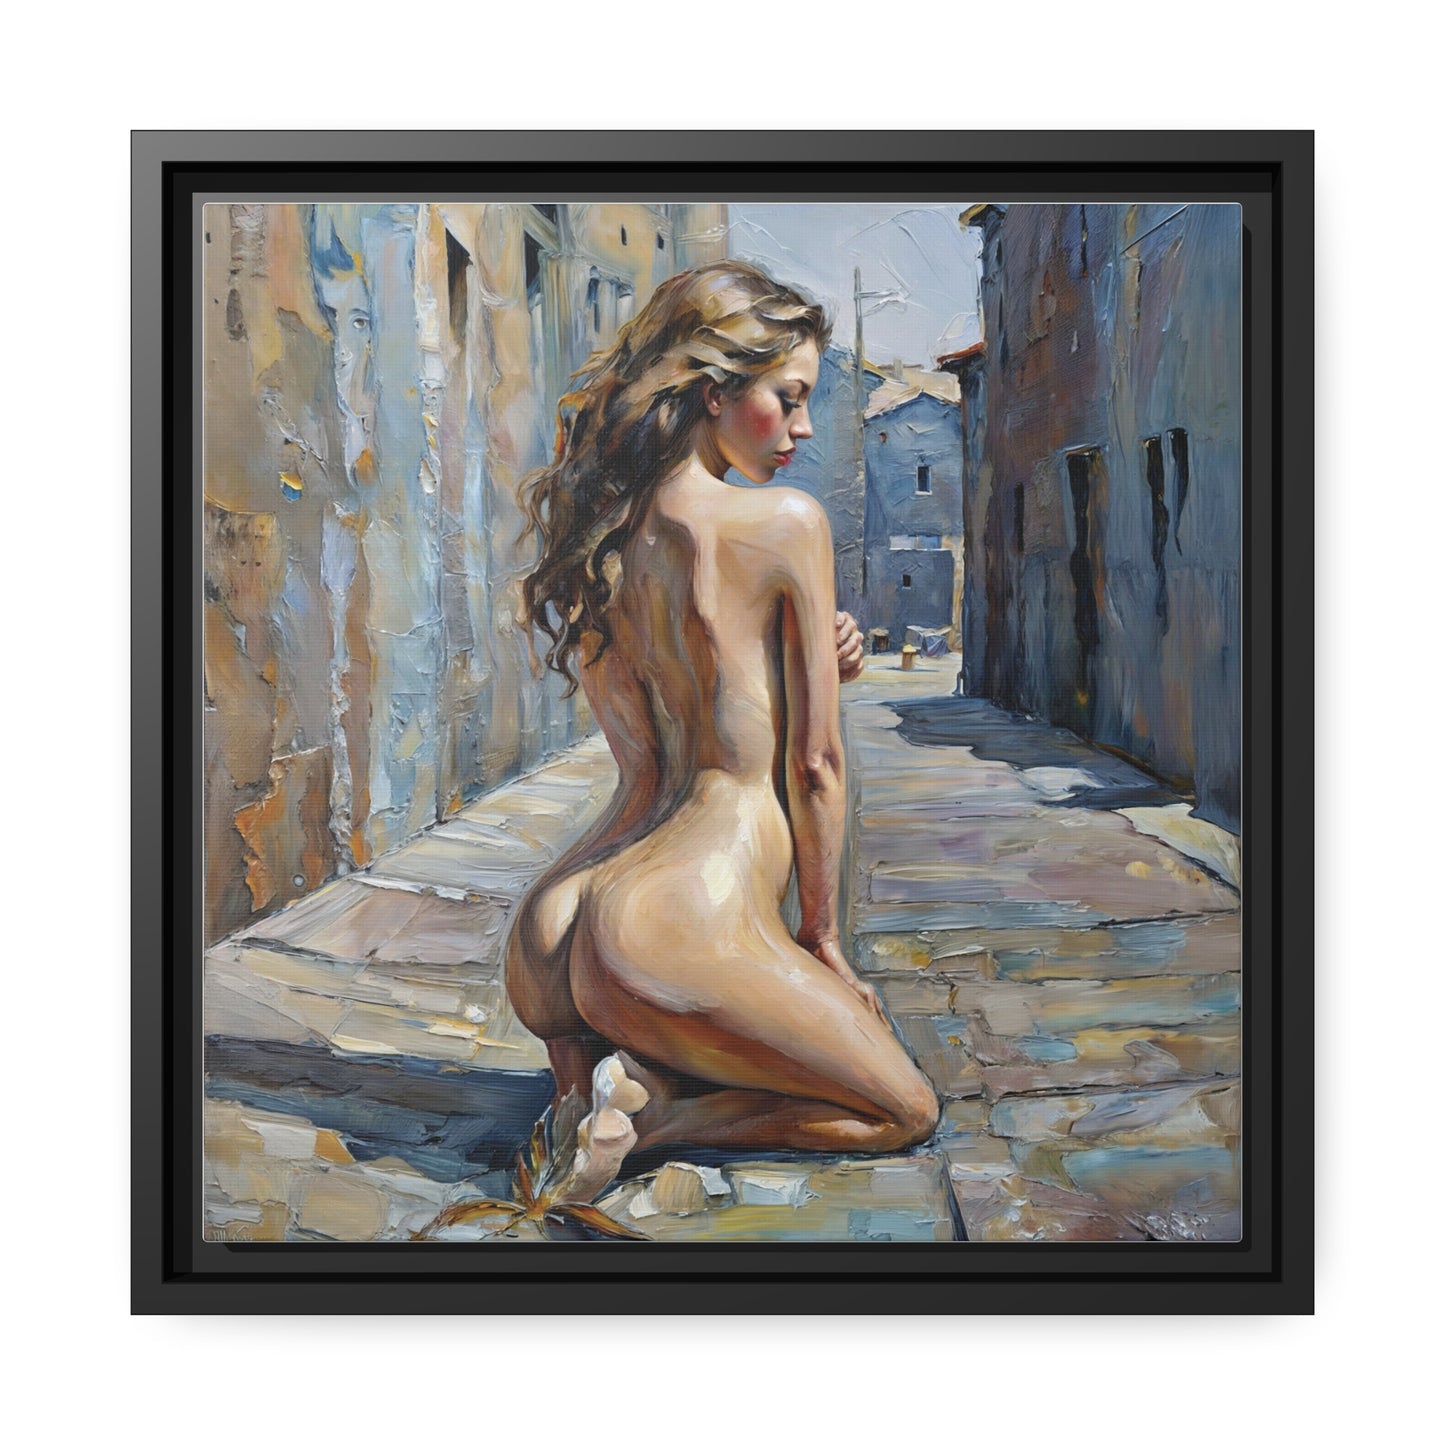 Contemplative Beauty in Old Town, Modern Figurative Art Canvas, Urban Elegance Nude Painting, Expressive Female Form Wall Decor